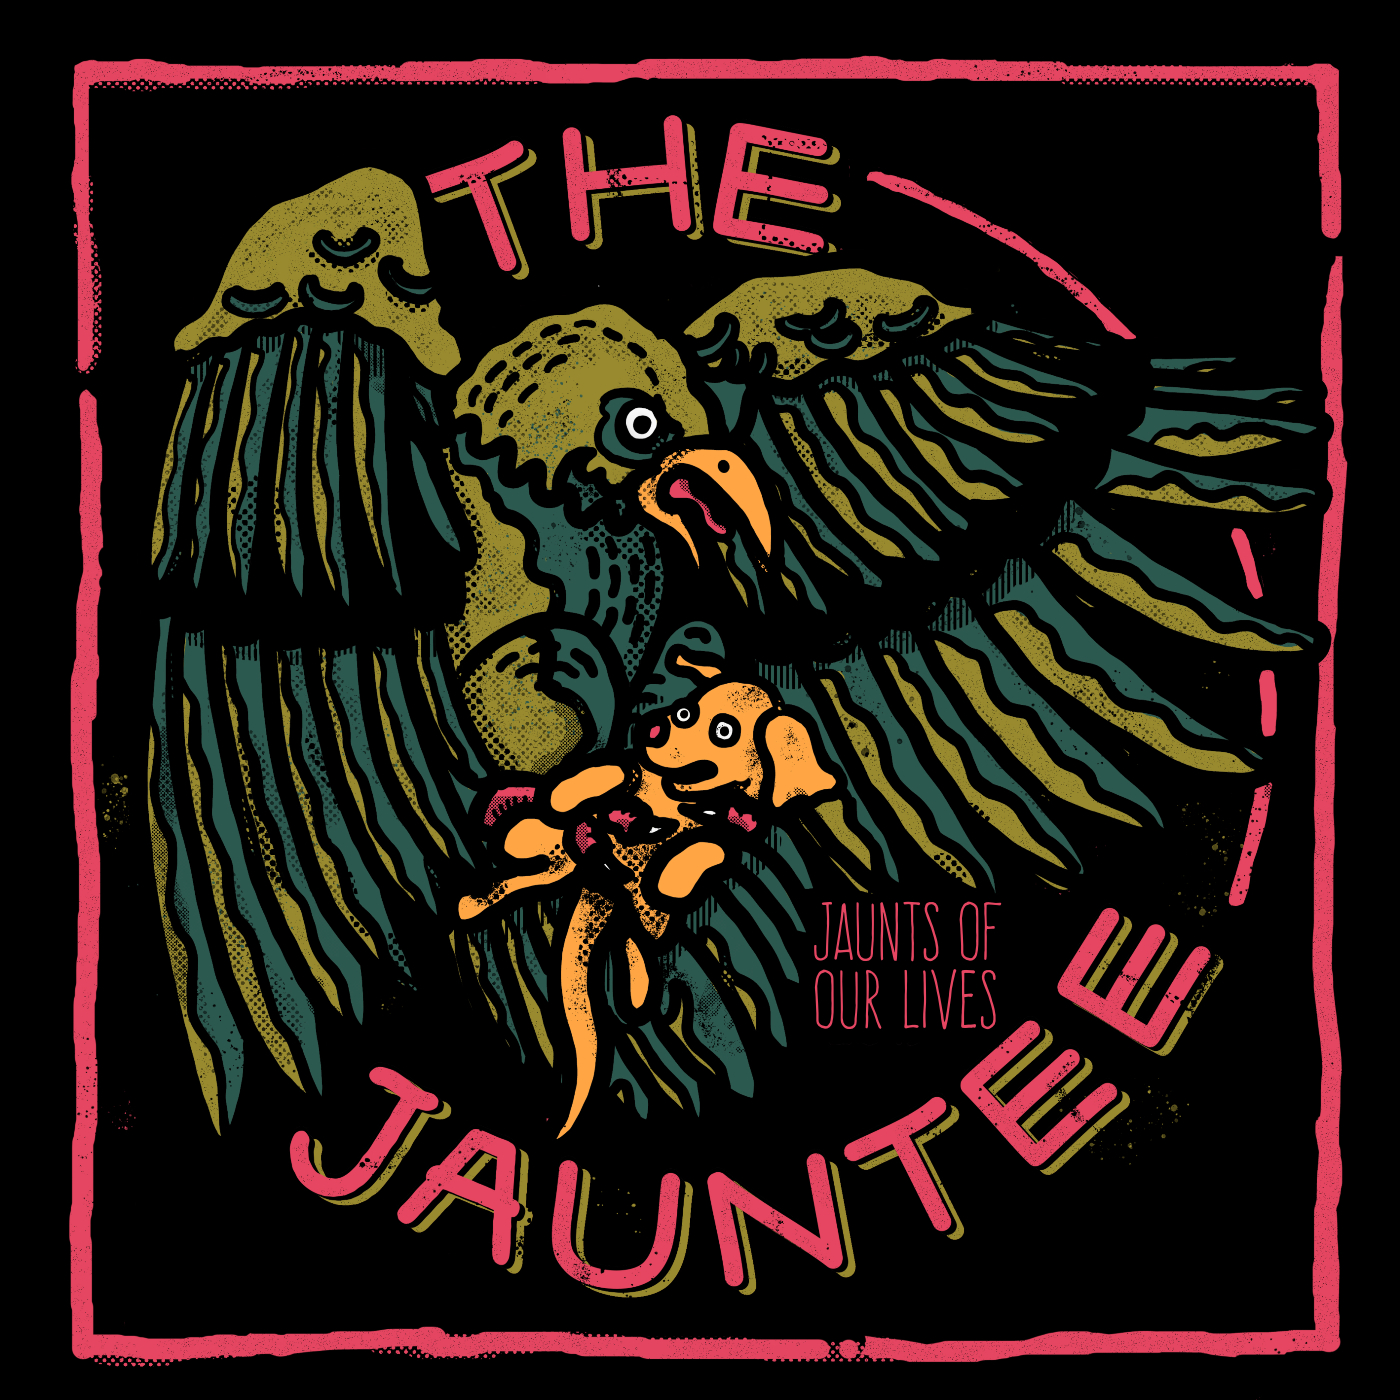 The Jauntee release 'Jaunts Of Our Lives